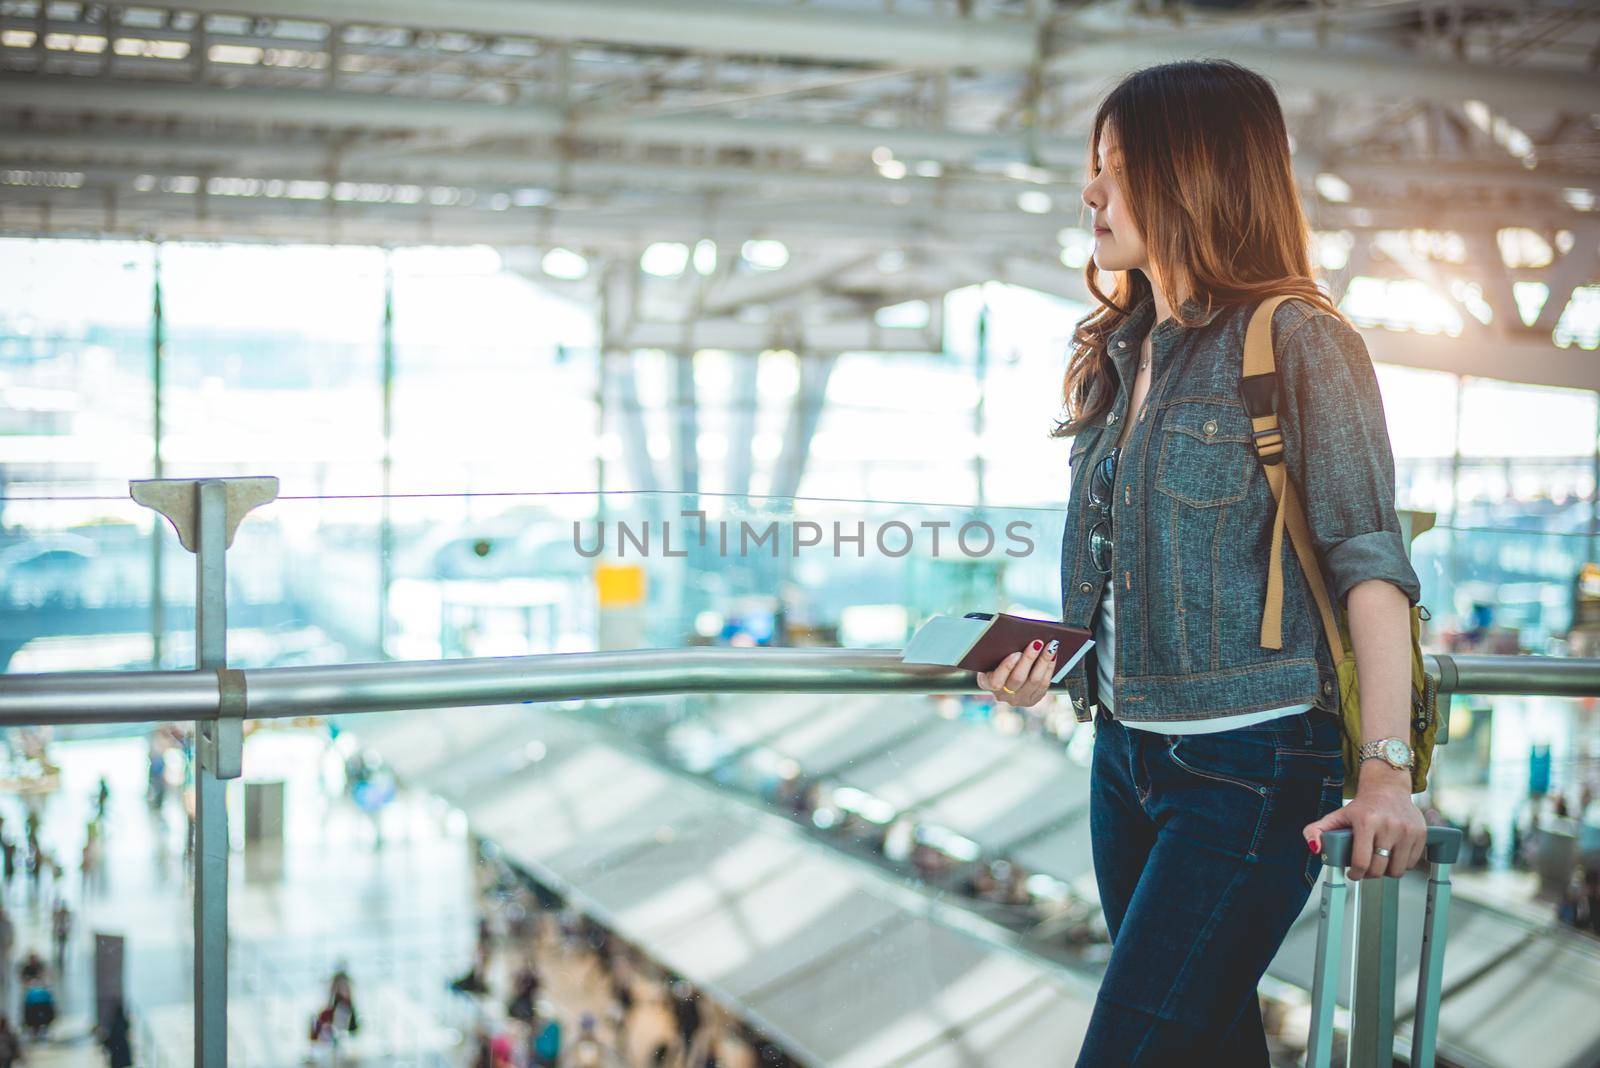 Beauty female tourists holding passport and waiting for flight to take off at airport. People and lifestyles concept. Travel and Adventure theme. Side view portrait.